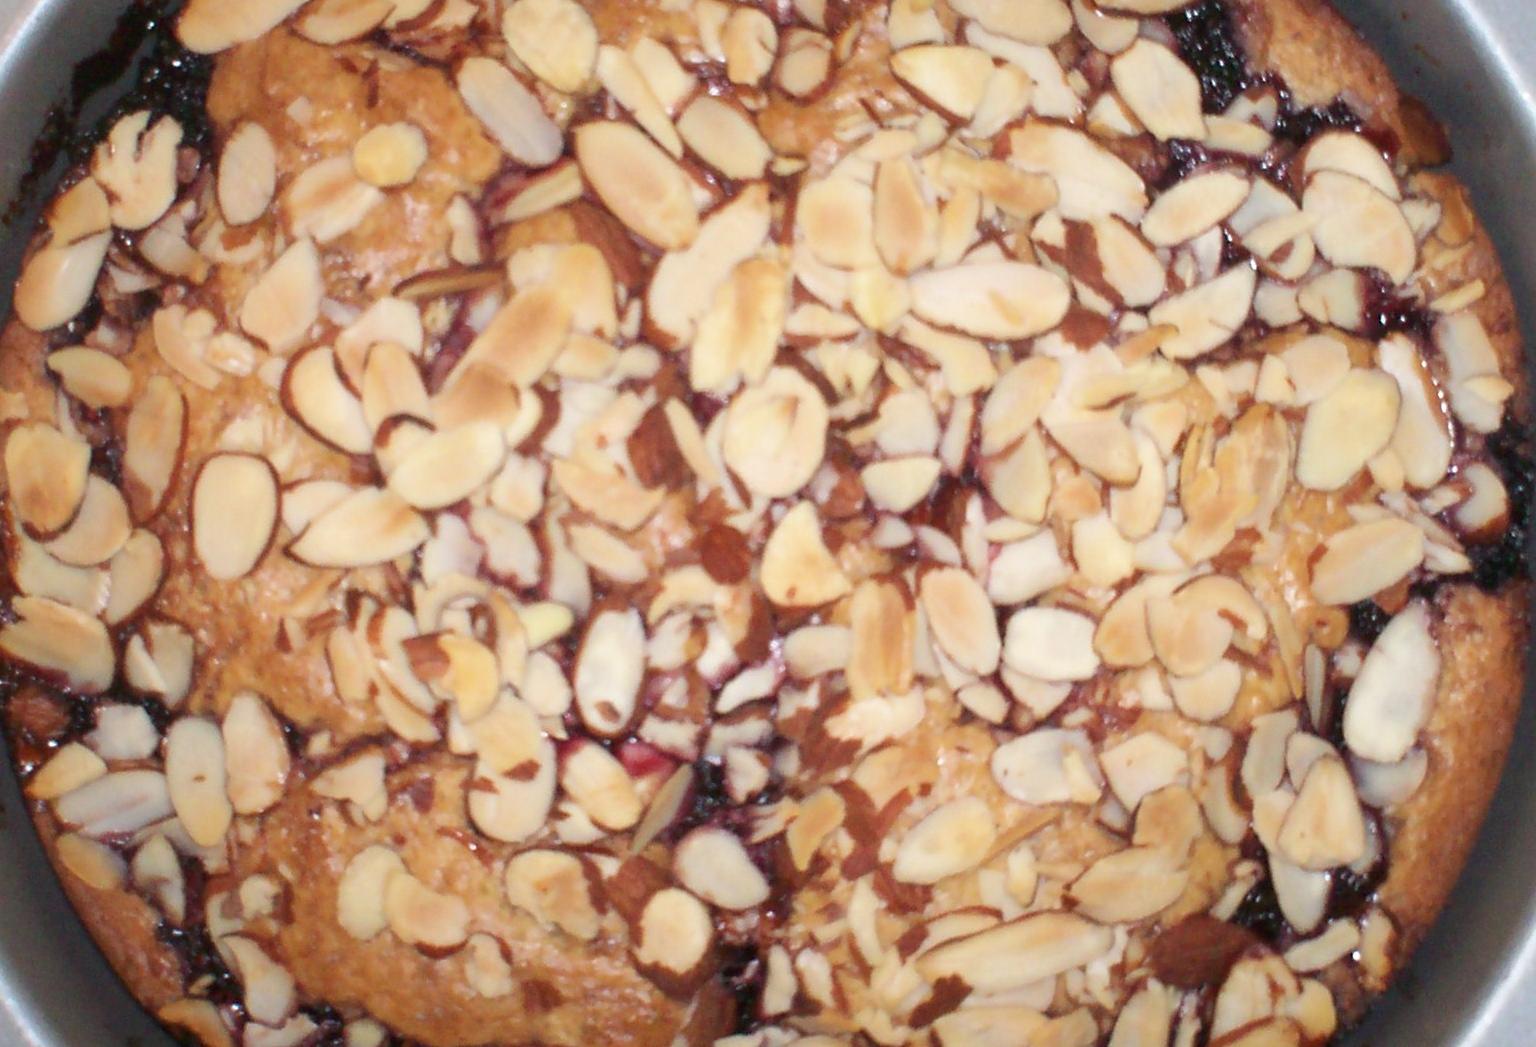  The sweet aroma of raspberries and almonds will fill your kitchen as you bake this heavenly treat.